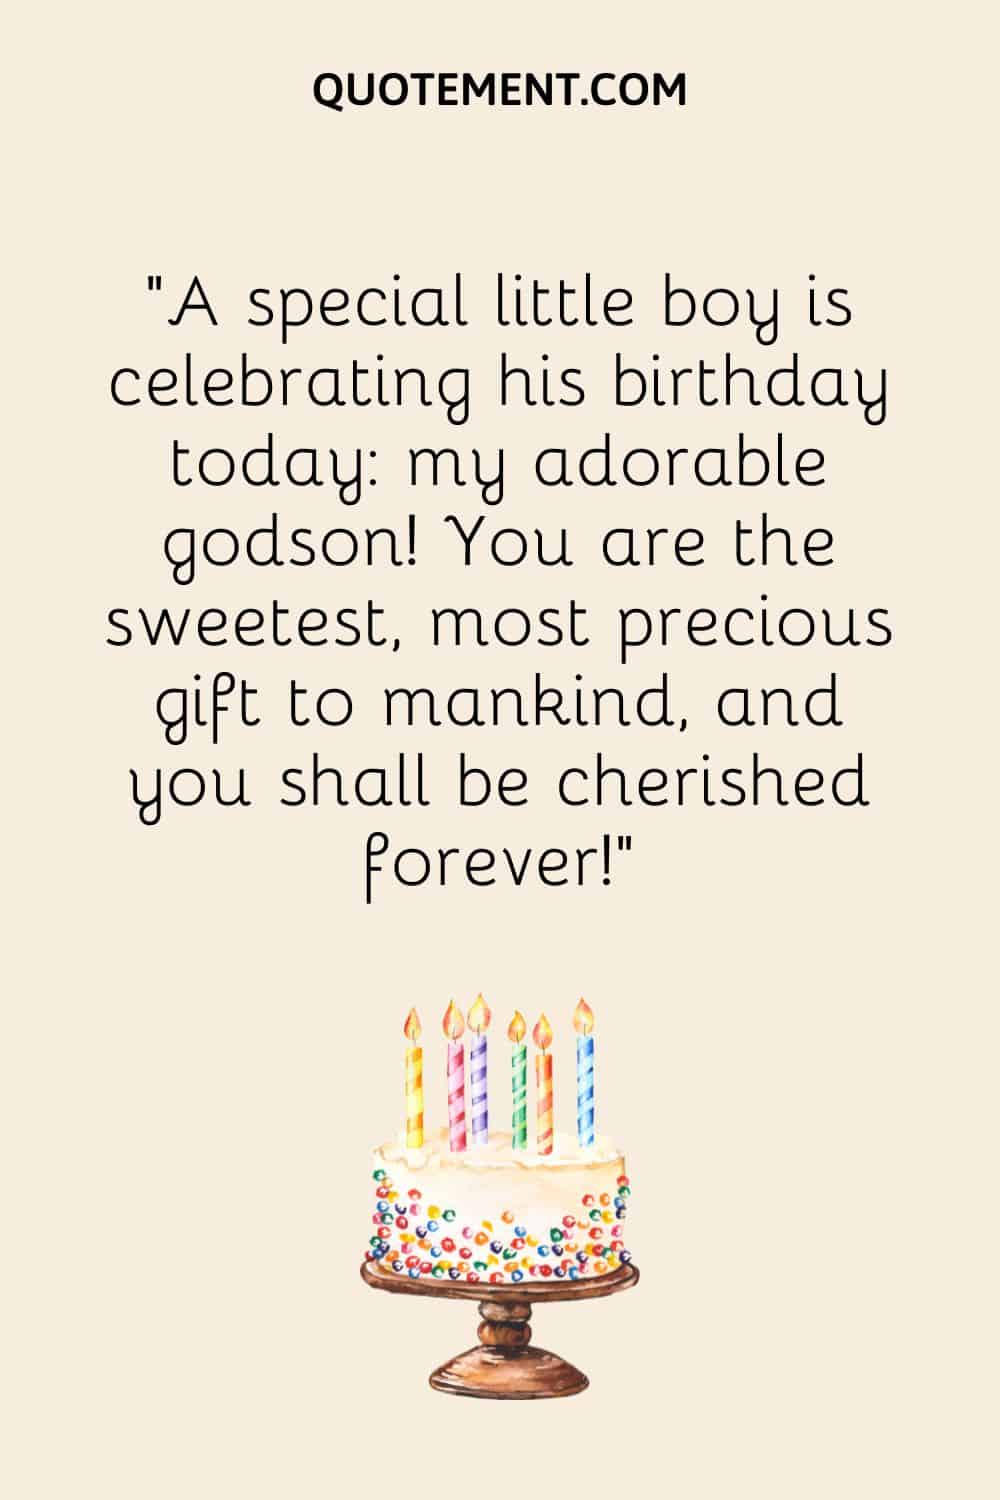 “A special little boy is celebrating his birthday today my adorable godson! You are the sweetest, most precious gift to mankind, and you shall be cherished forever!”